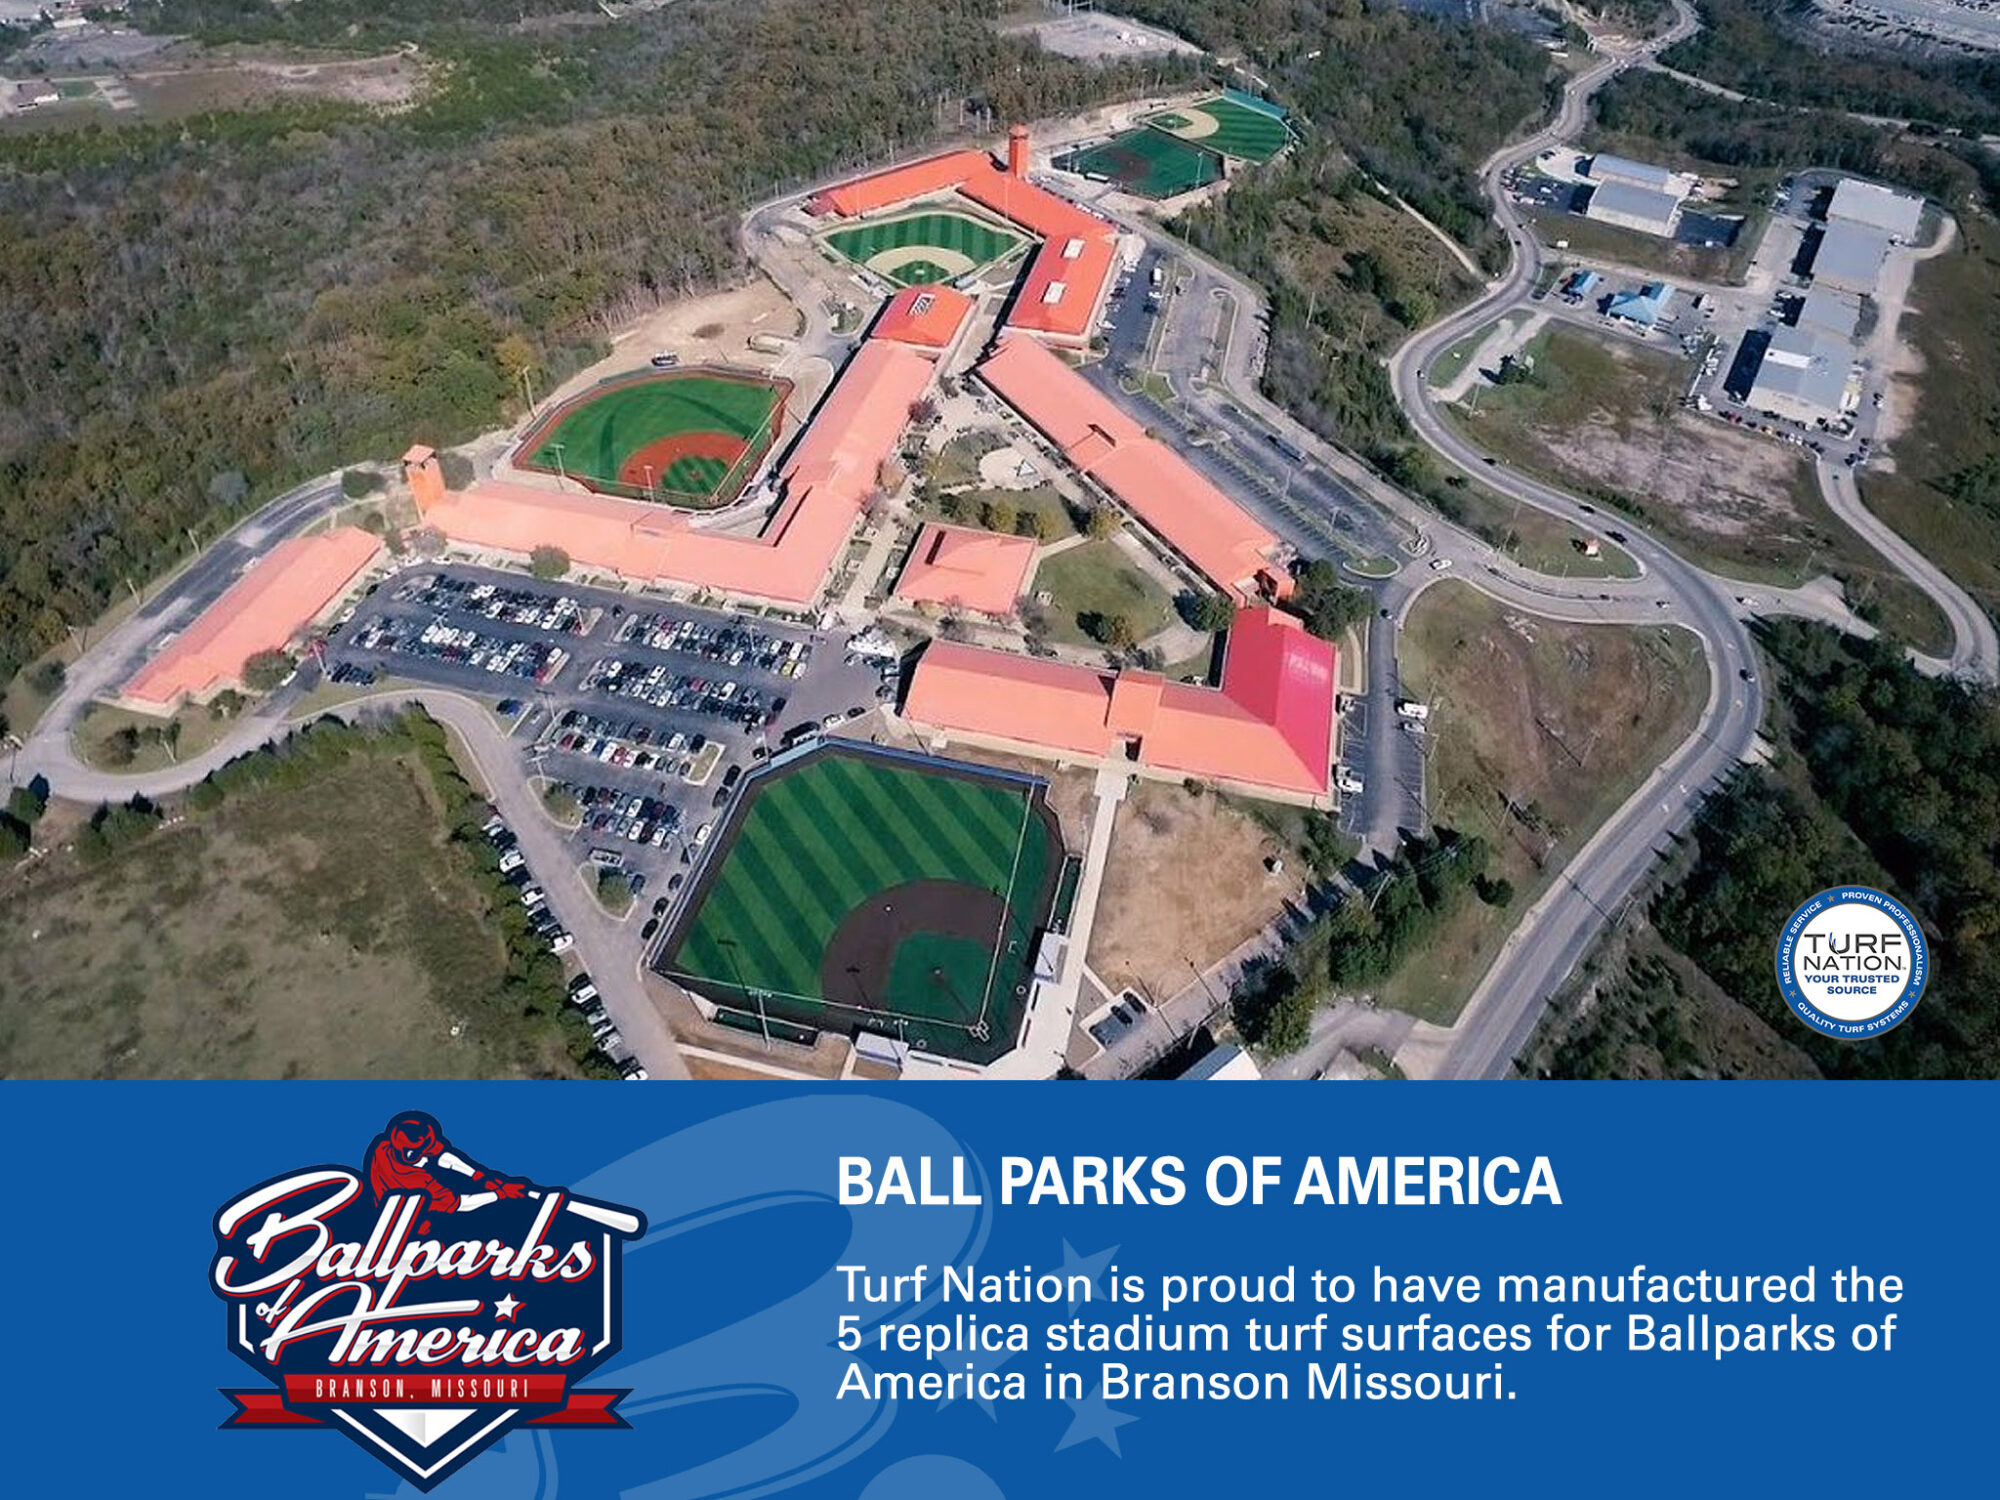 Ball Parks of America all provided by Turf Nation